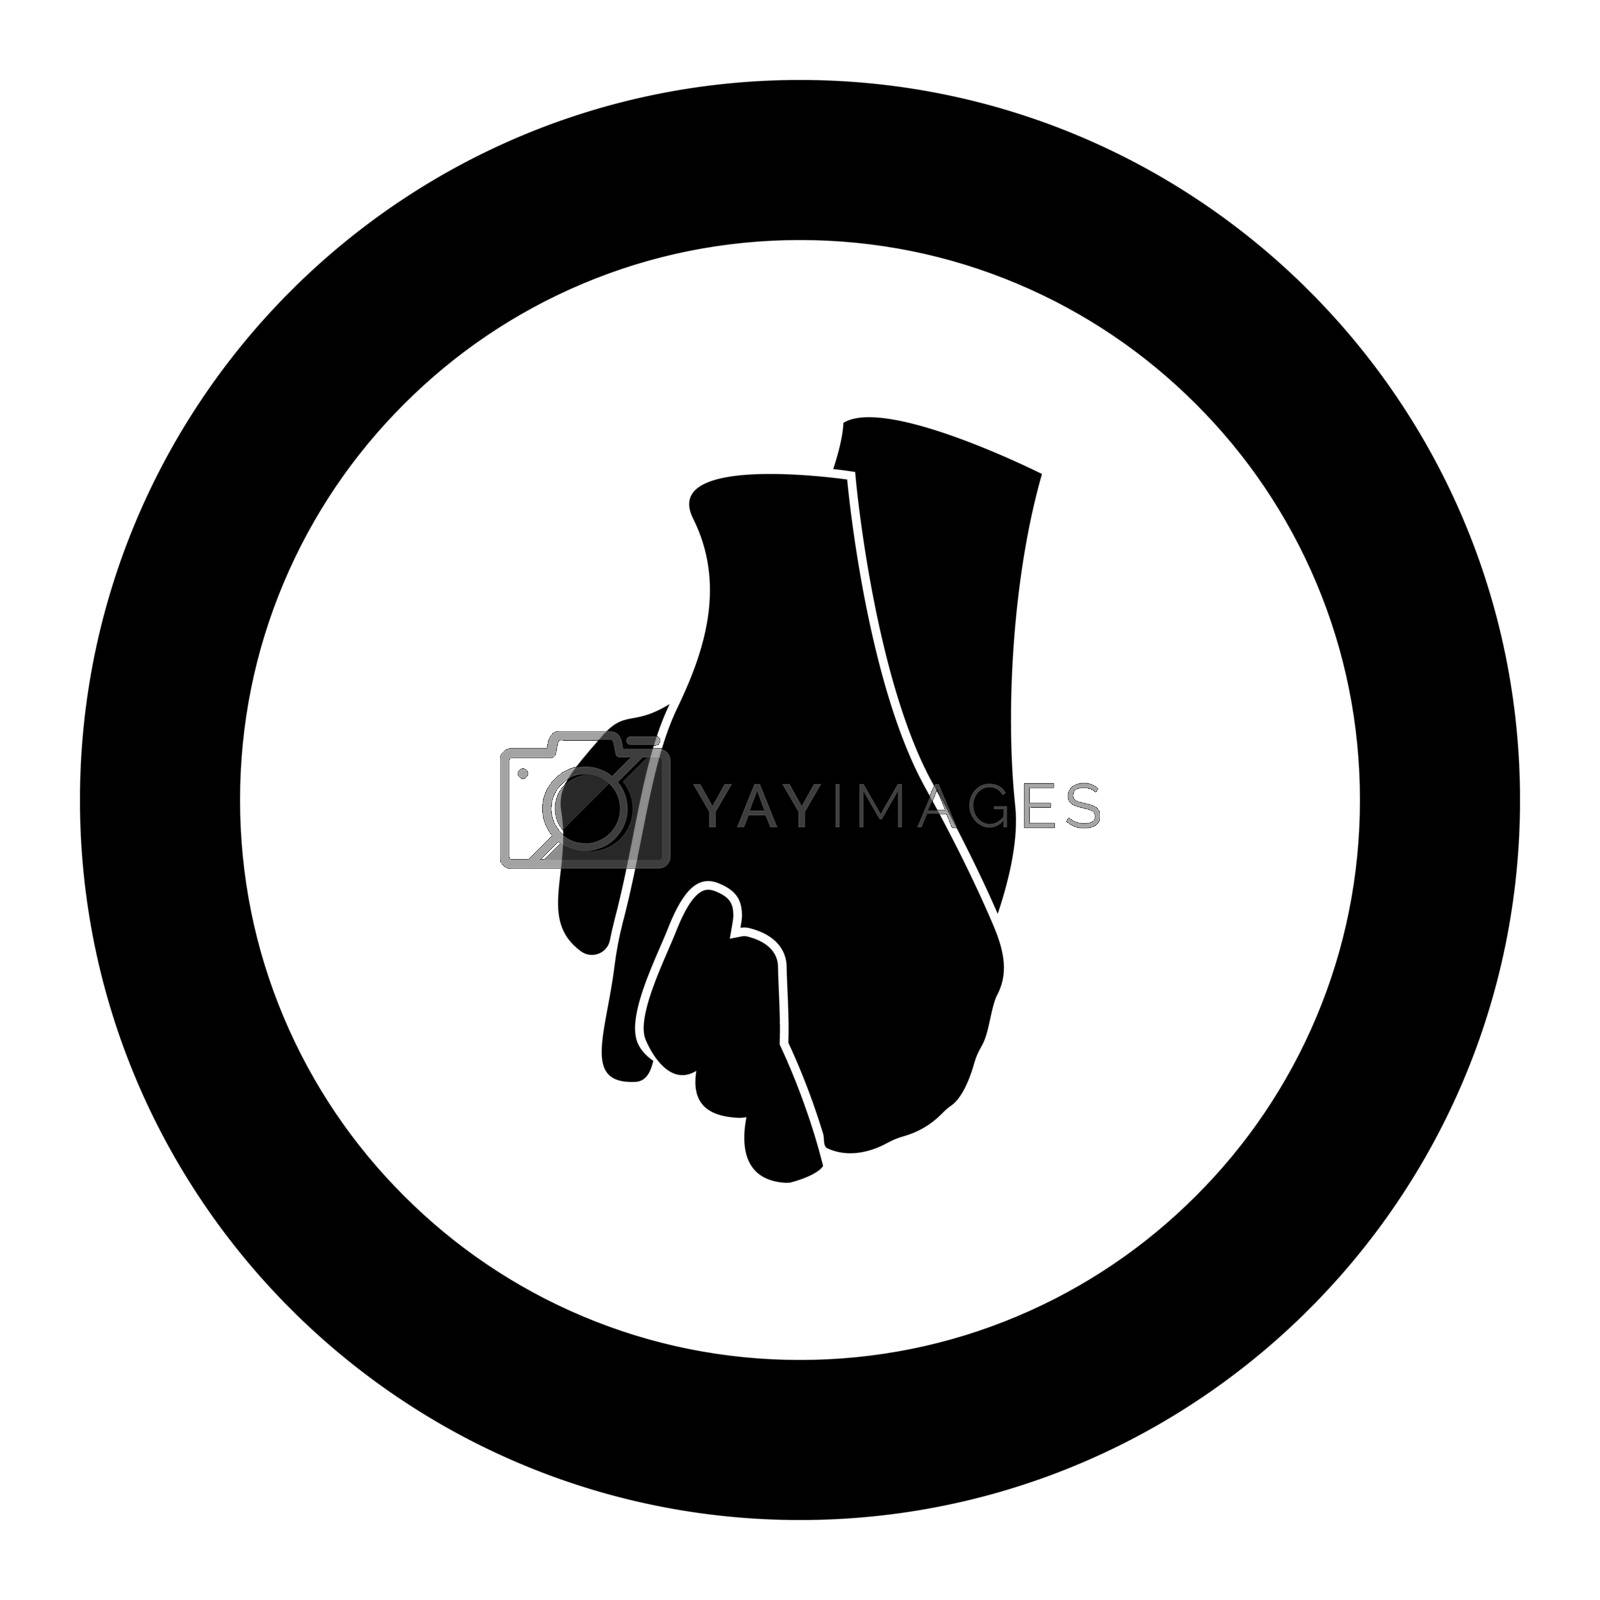 Royalty free image of hand holding another hand , sign of love art vector icon black color in circle by serhii435